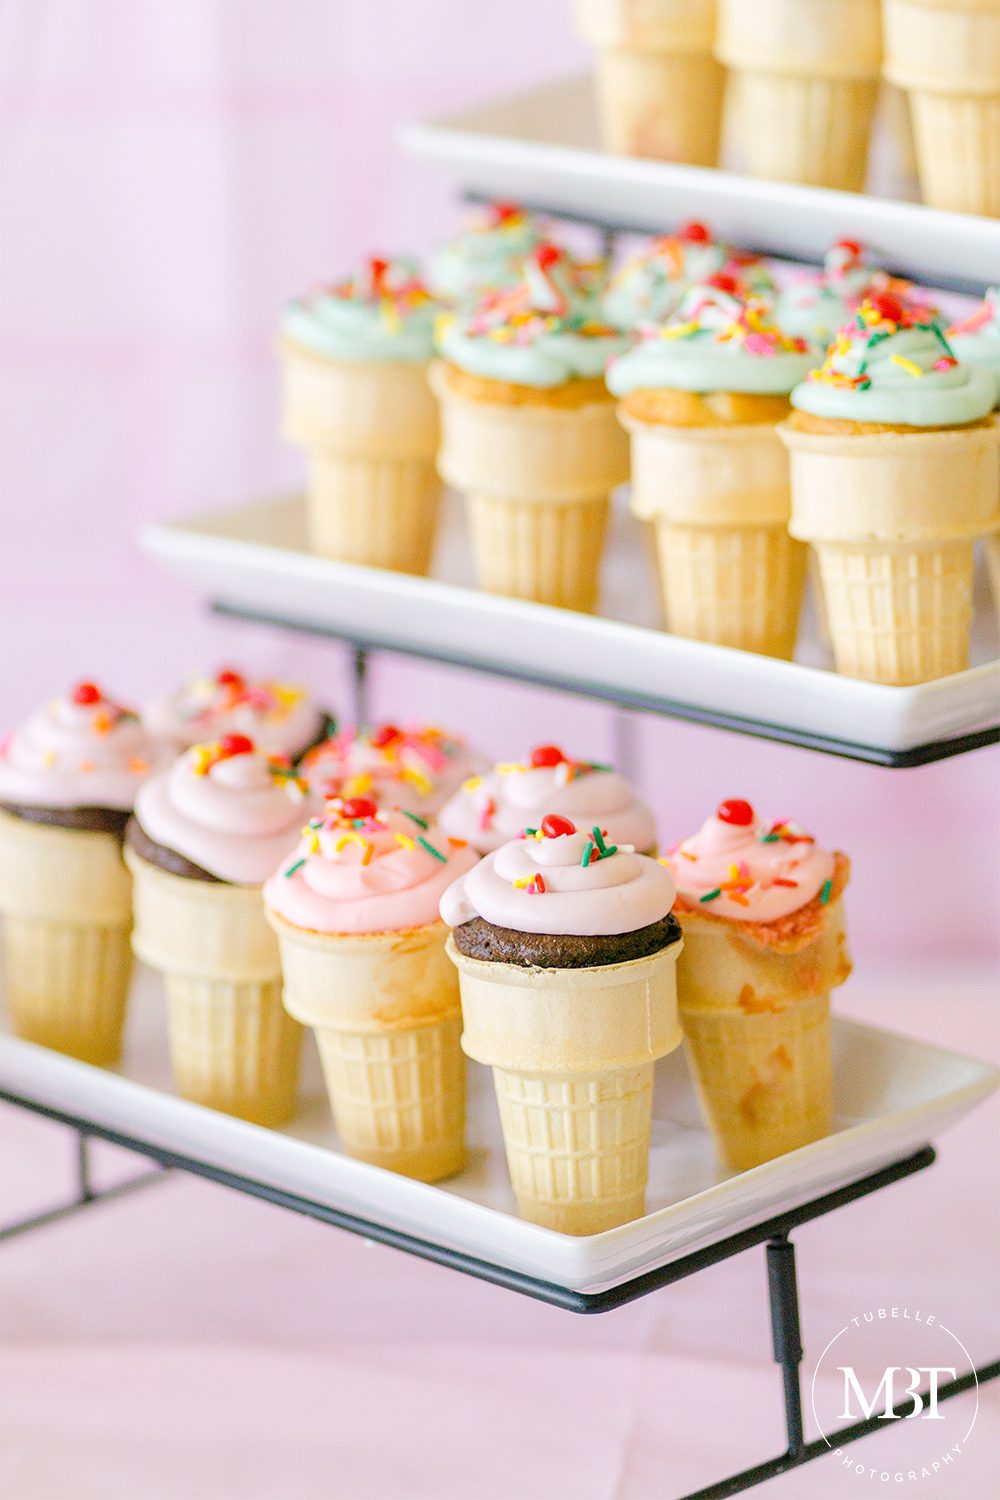 ice cream themed party, details - cupcakes, in Arlington, Virginia, taken by DMV event photographer